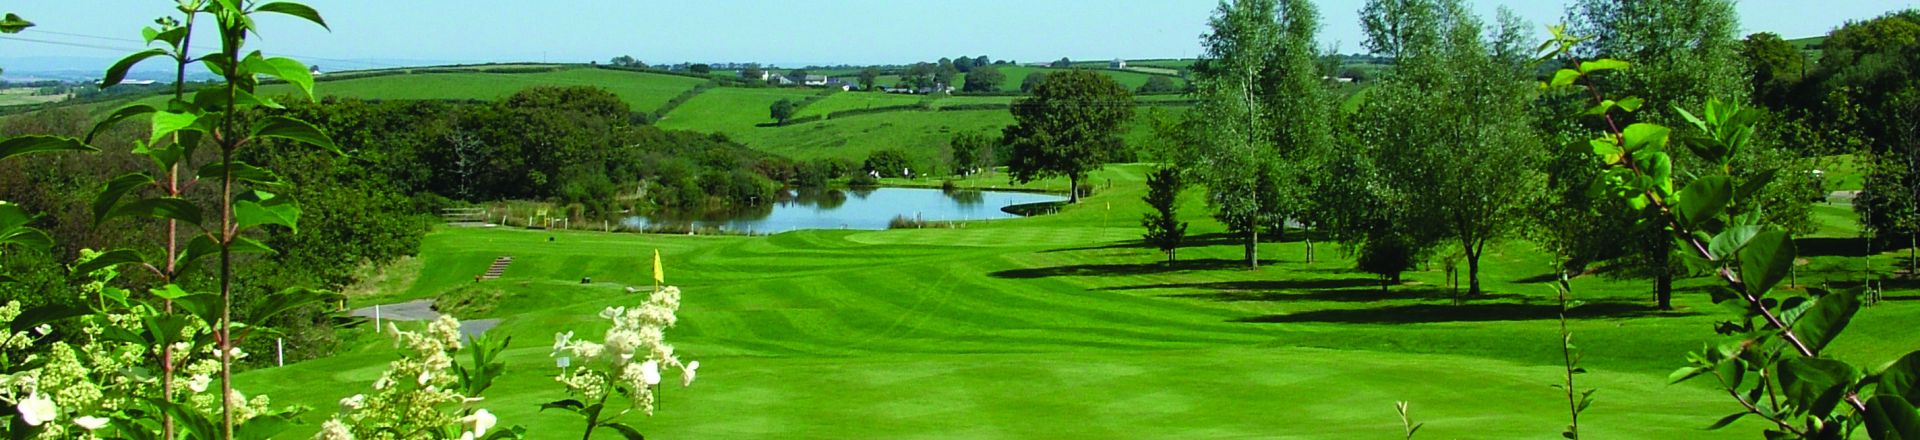 Golf Breaks in the South West of England at St Mellion